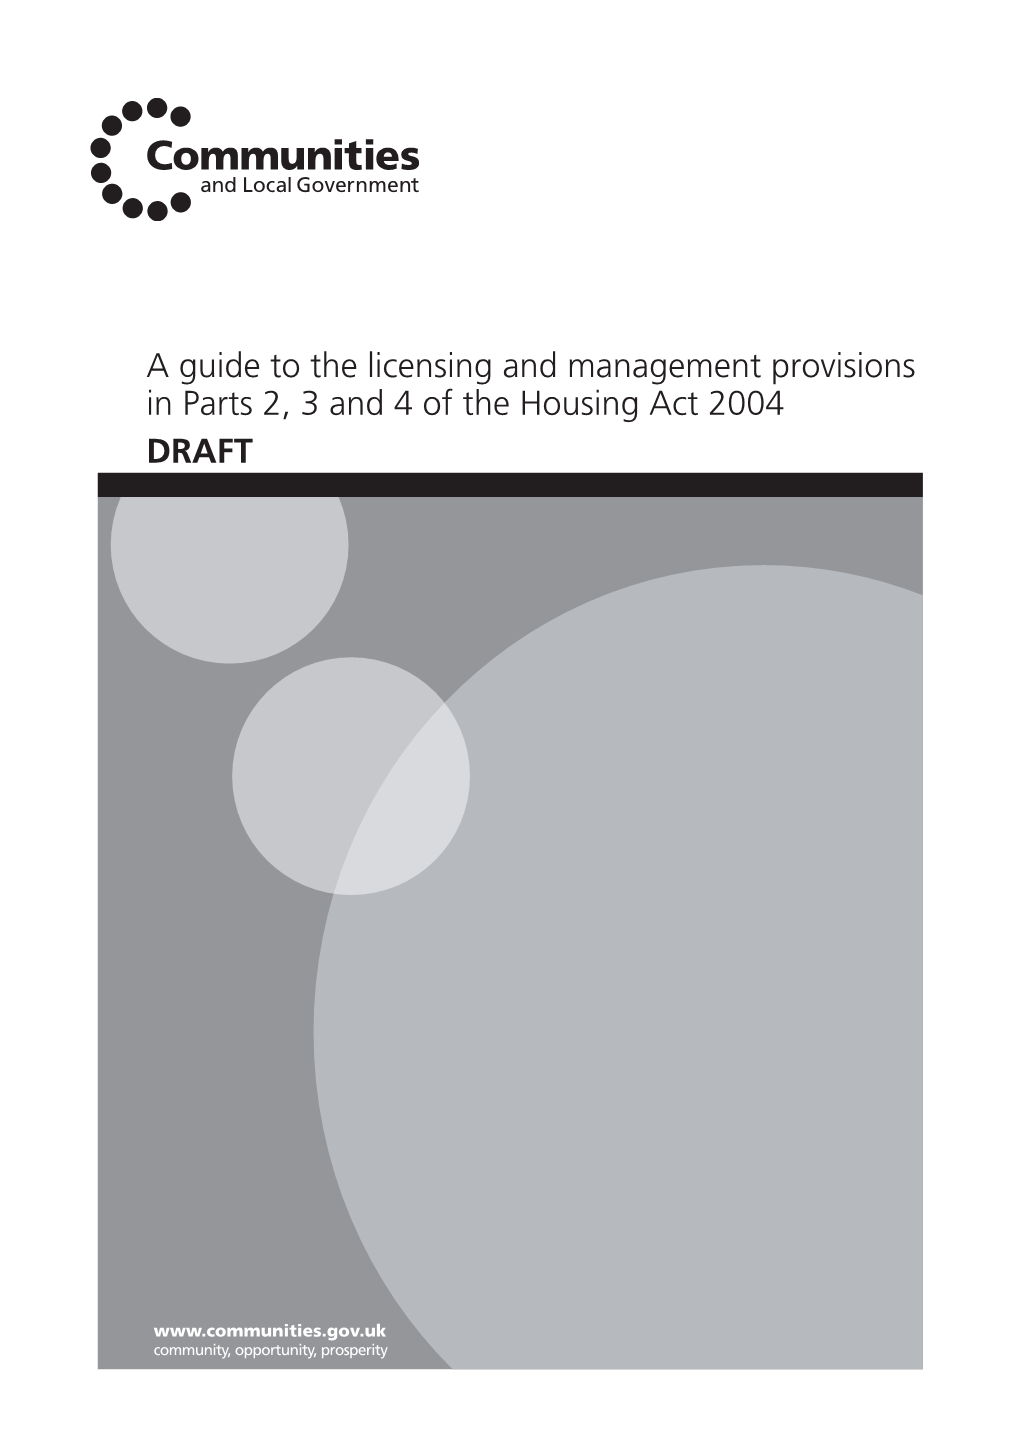 A Guide to the Licensing and Management Provisions in Parts 2, 3 and 4 of the Housing Act 2004 DRAFT